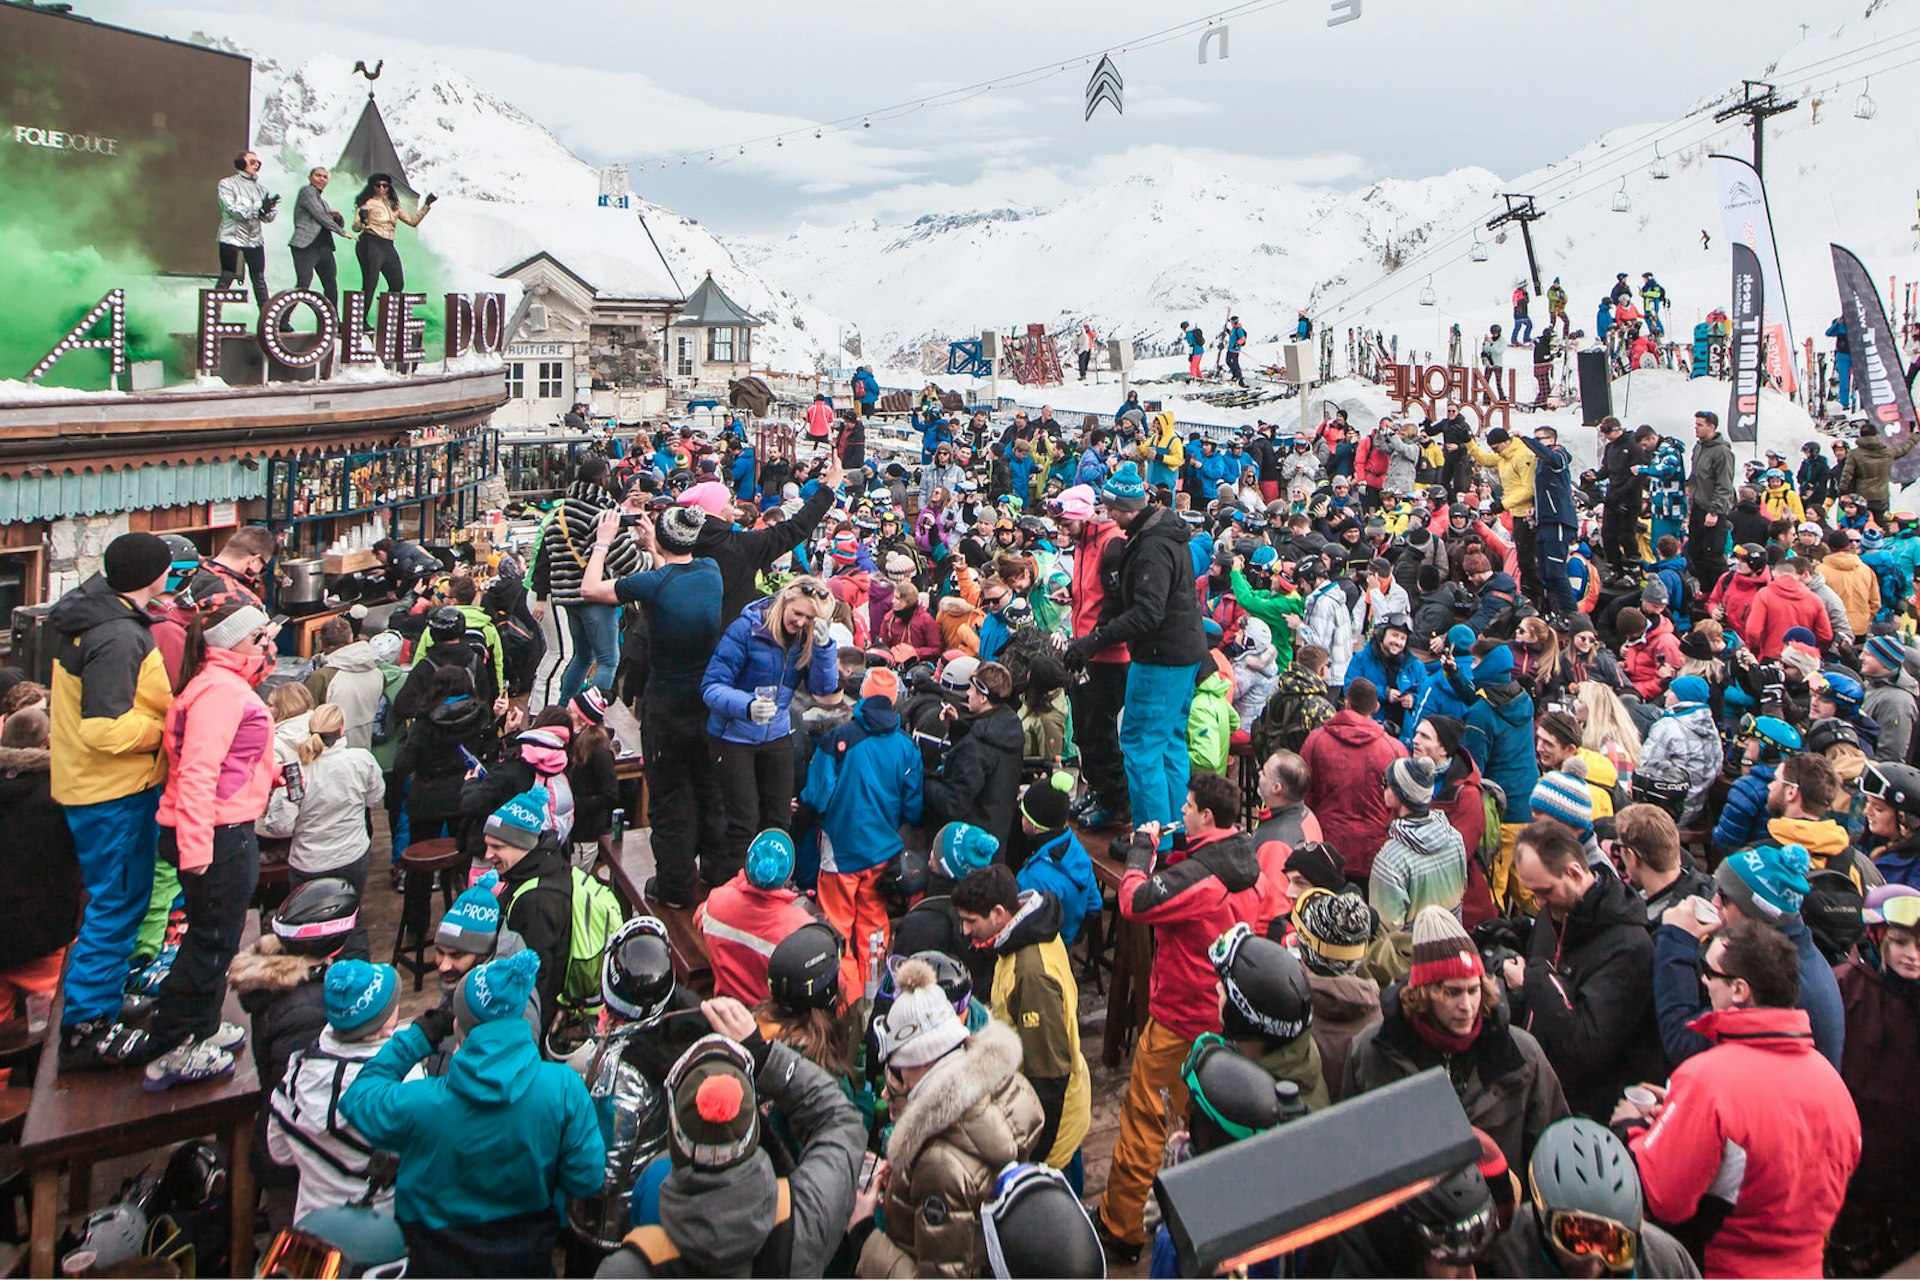 Revellers dance on the tables in La Folie Douce in Val d'Isère © Val d'Isère